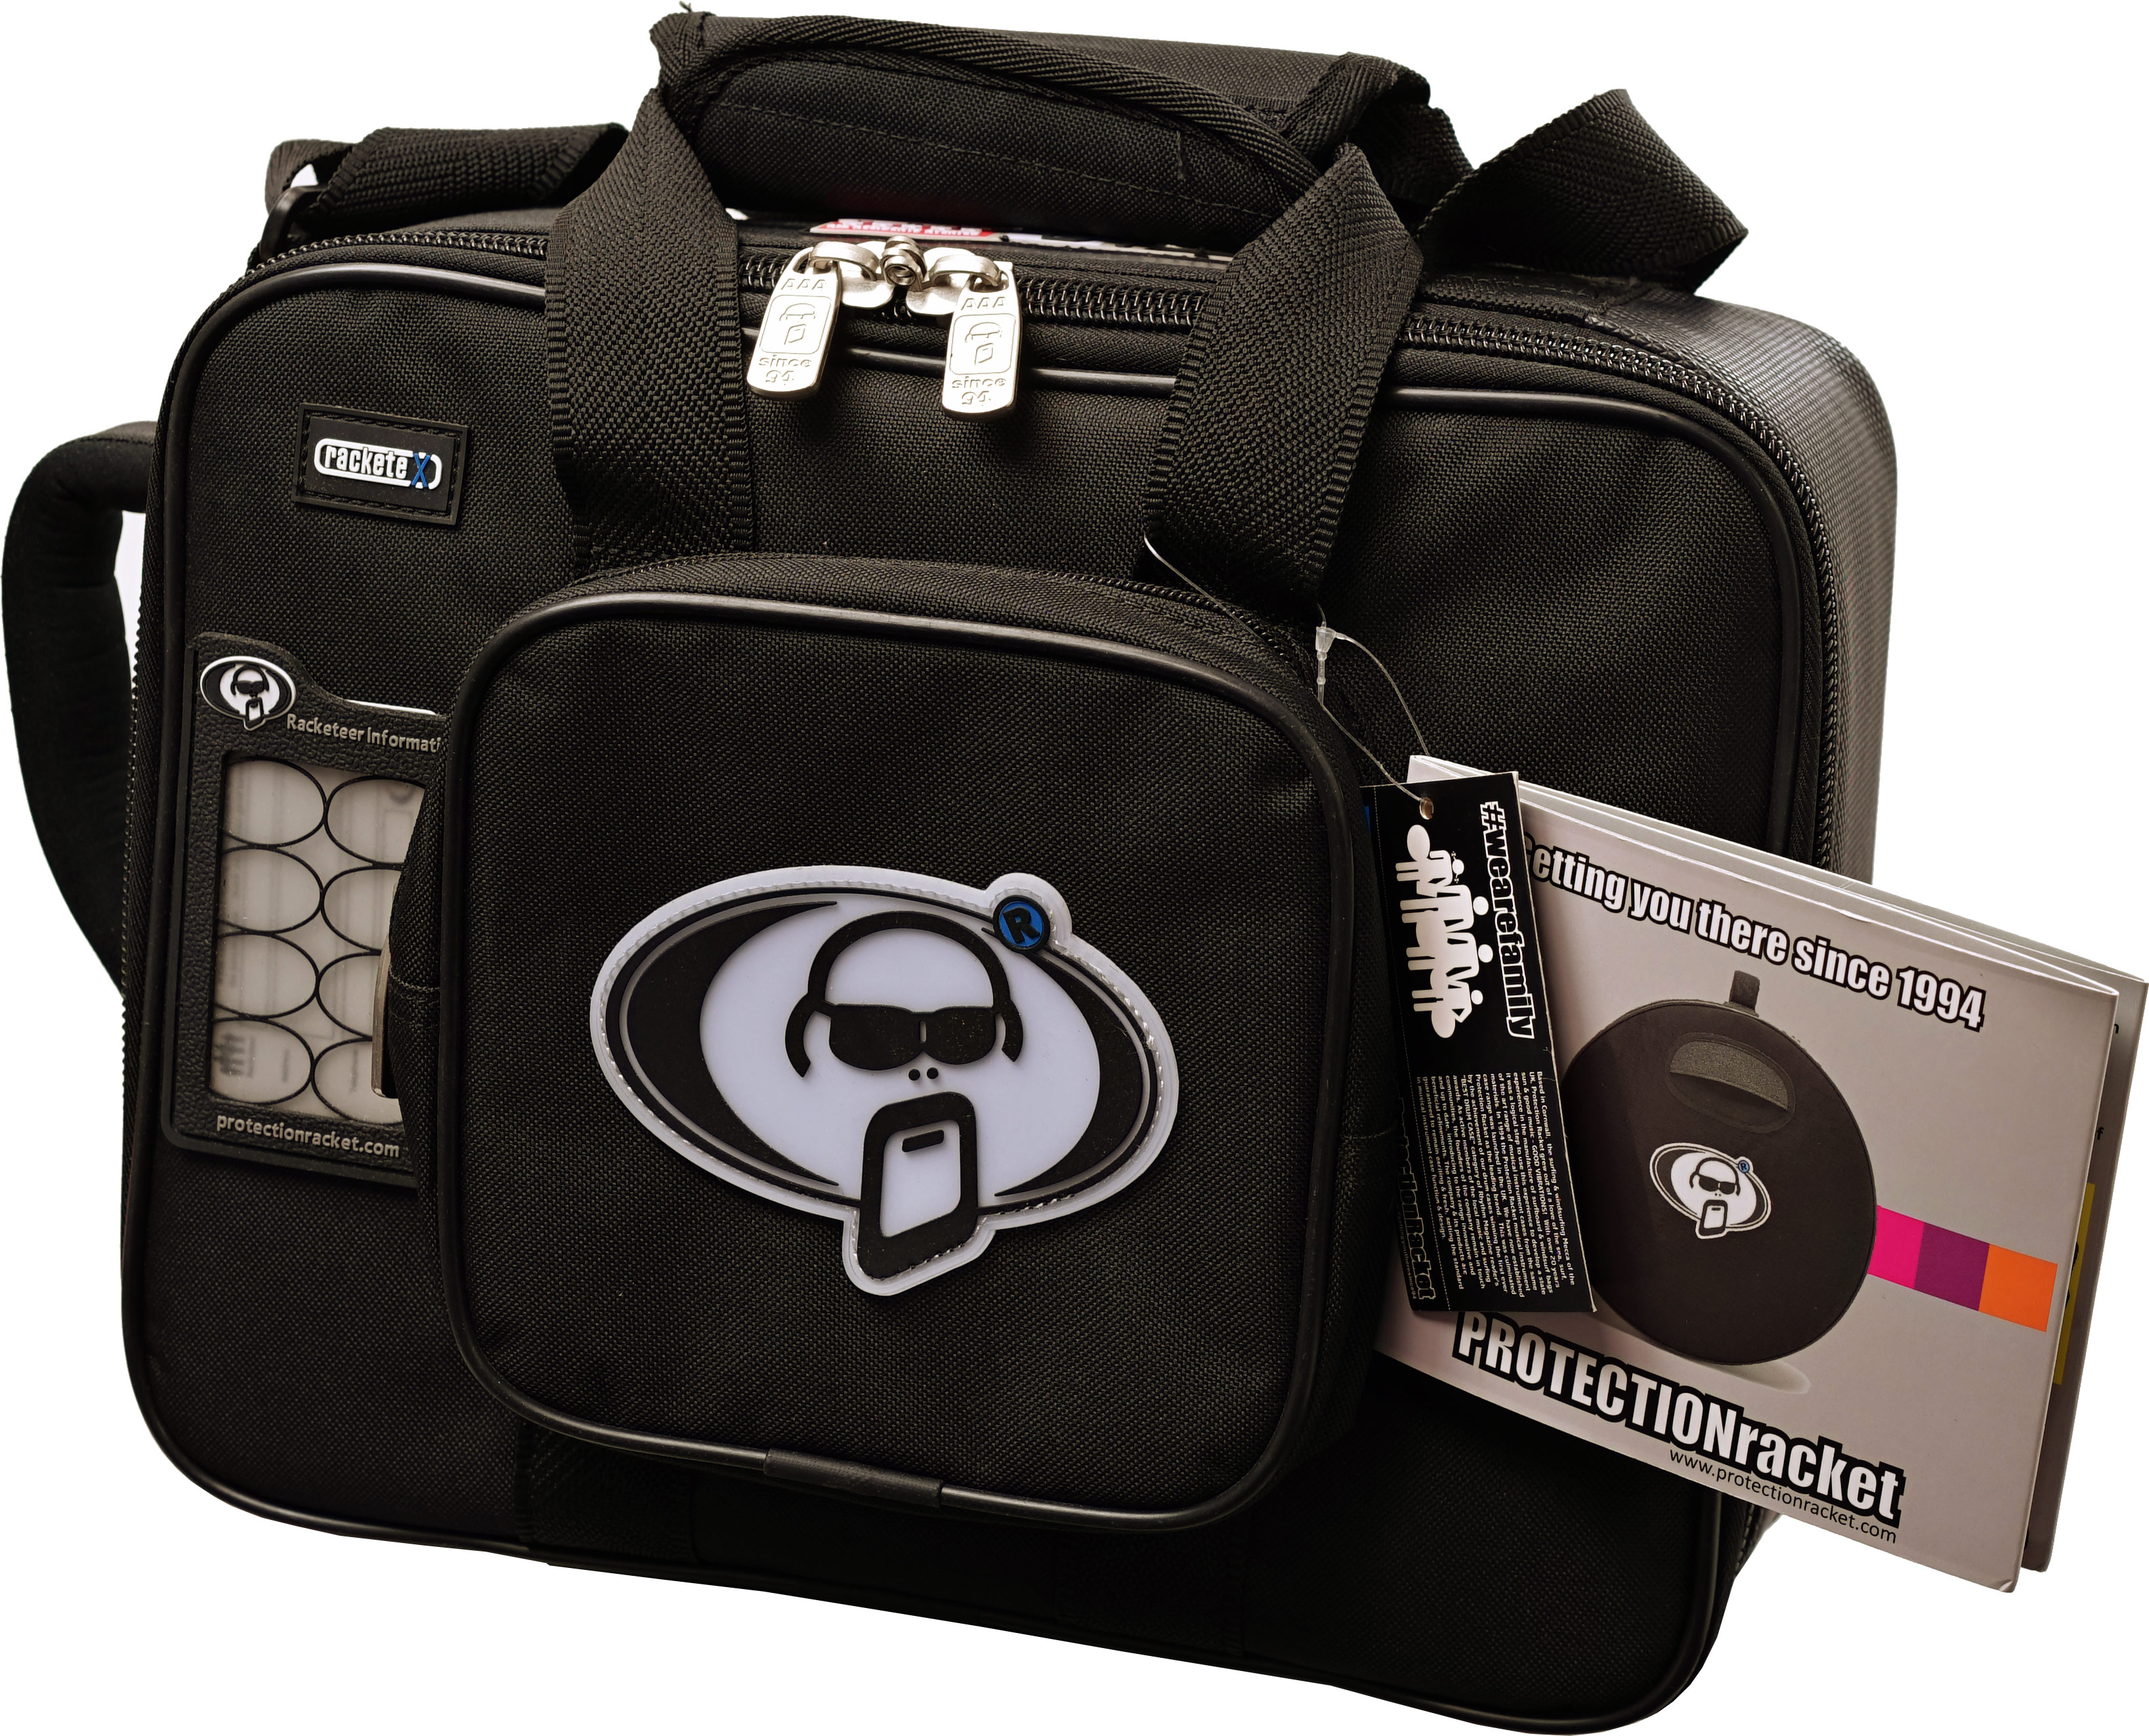 Protection Racket AAA HX Effects Case | guitarguitar